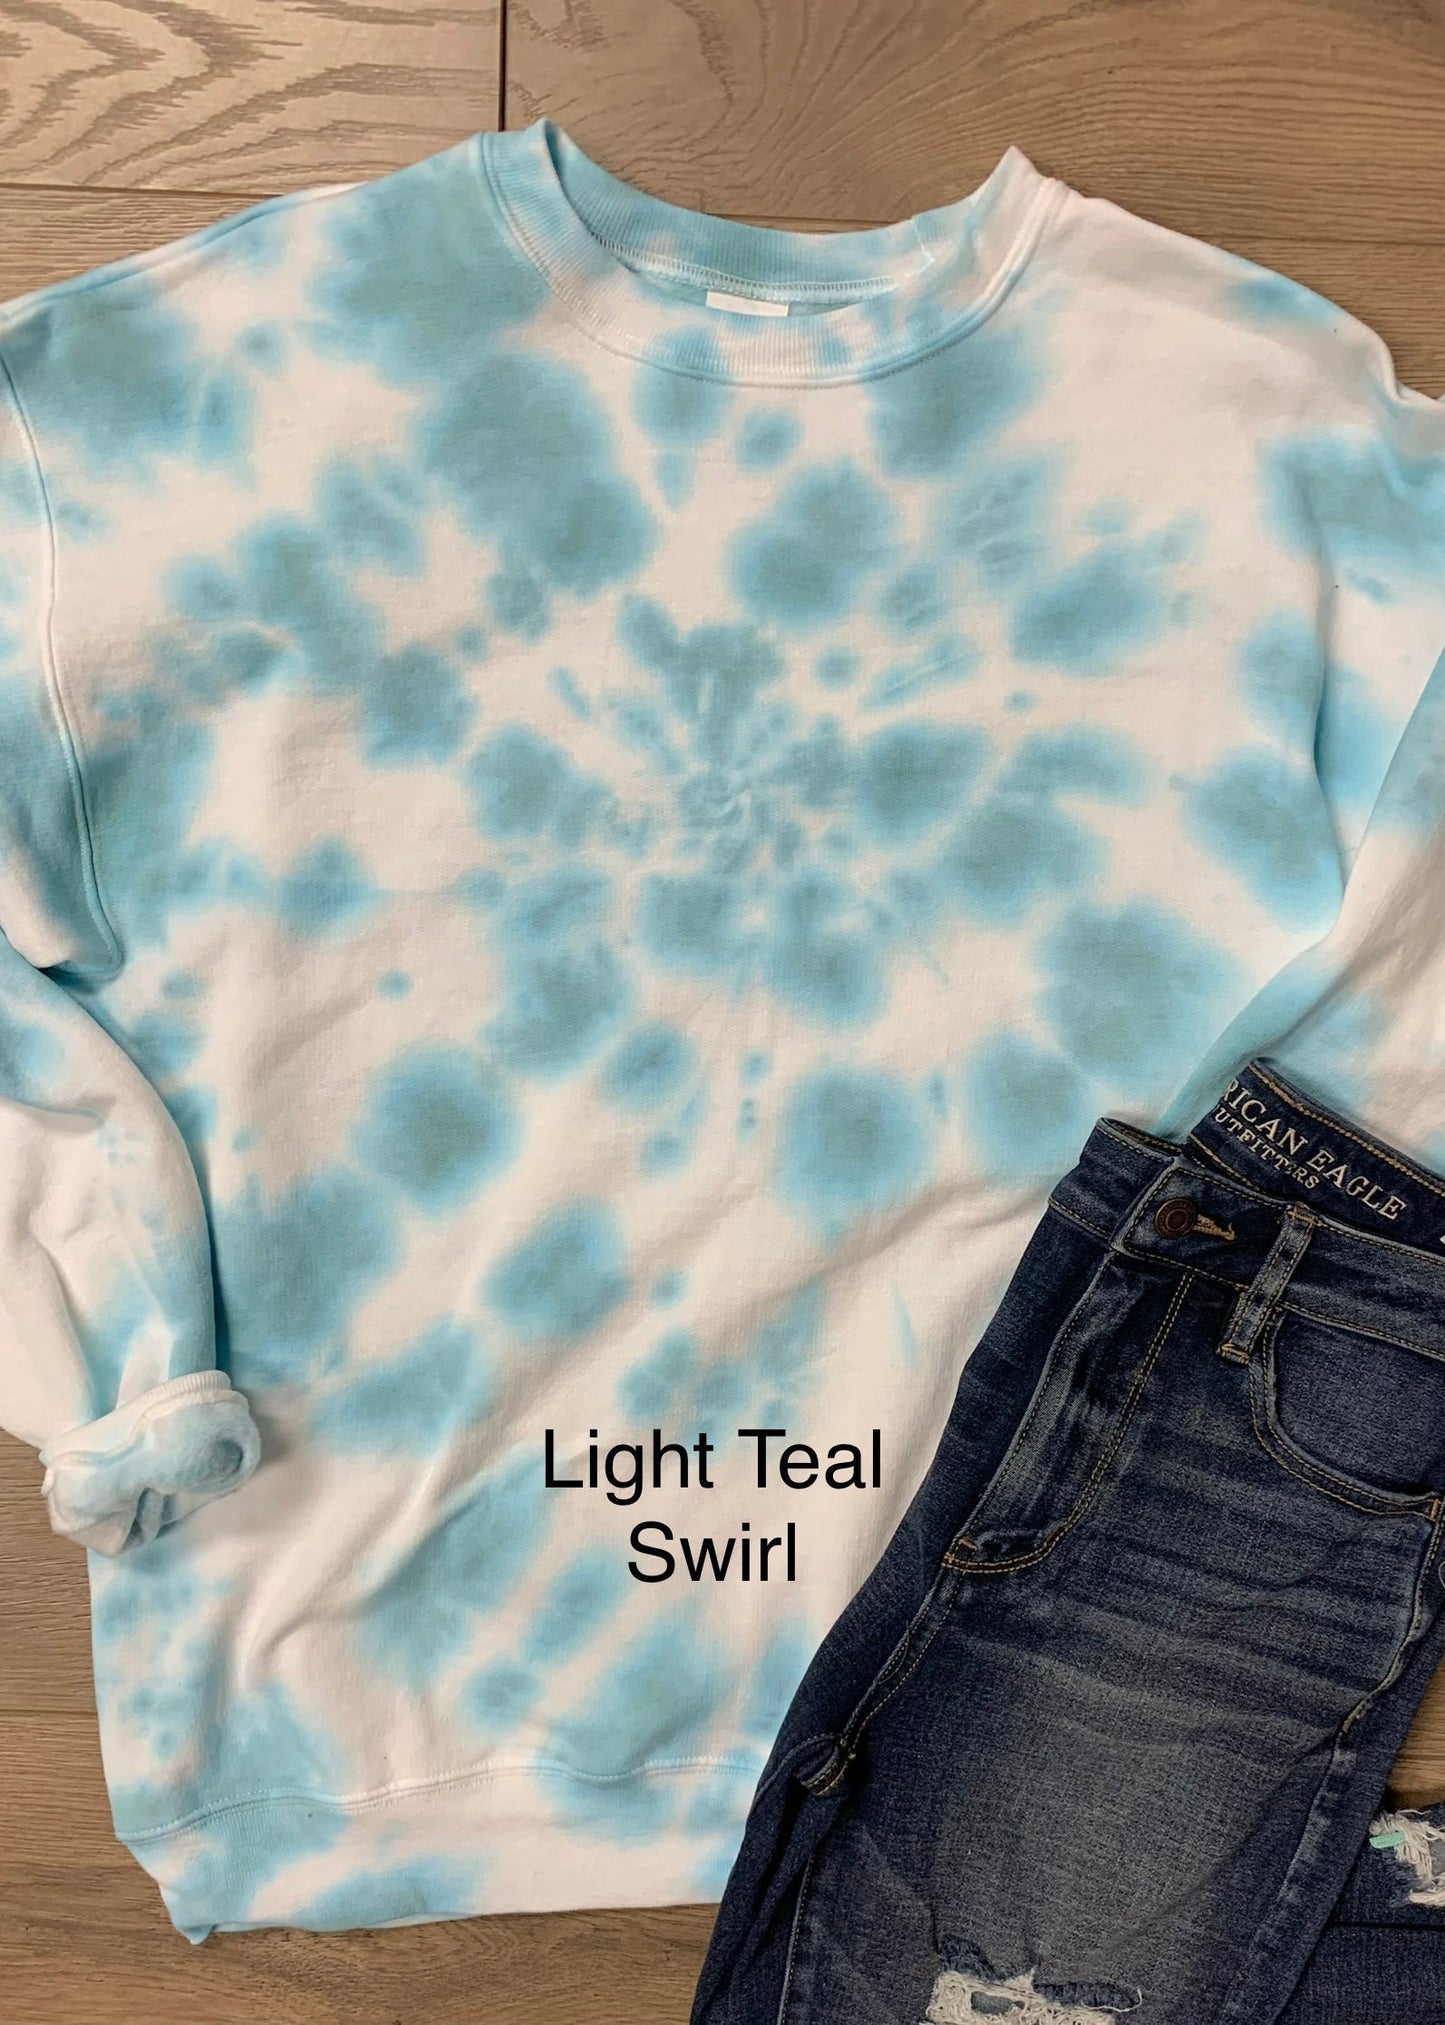 Hand-dyed Adult Outer Banks Long-Sleeve T-shirt - CHOOSE TIE DYE COLORS